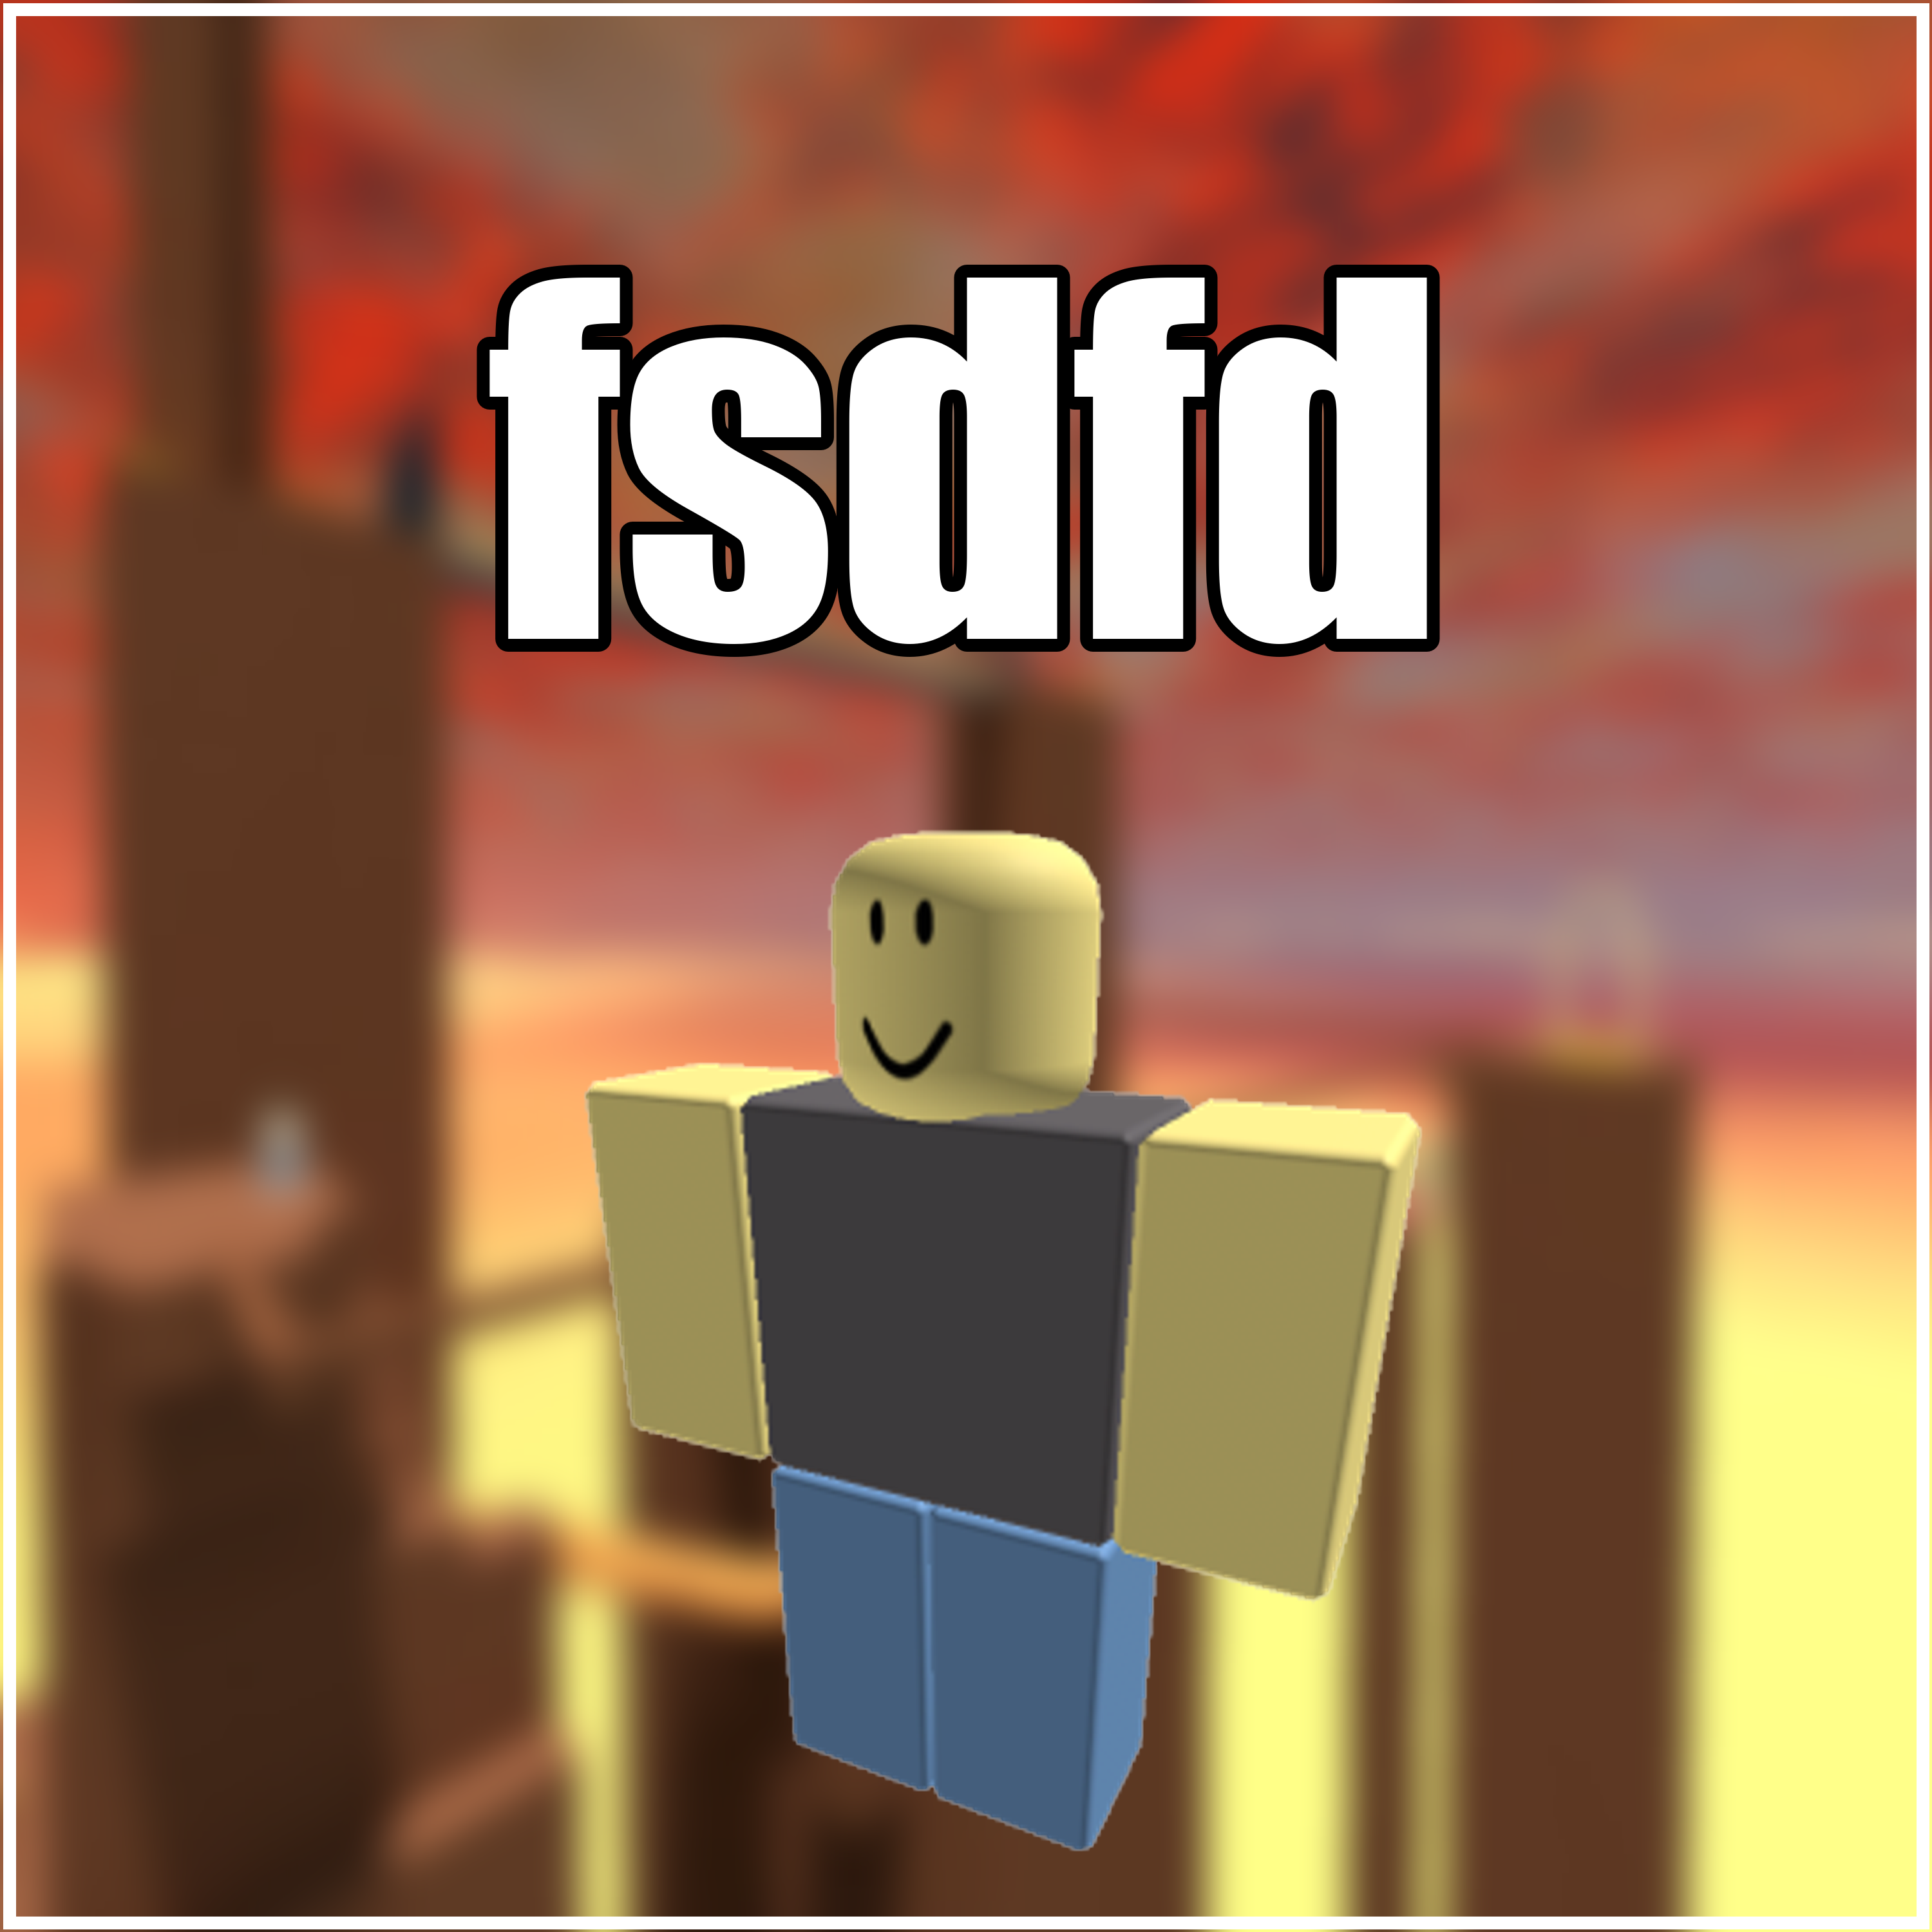 robruh RARE username "fsdfd" ROBLOX account guaranteed to be unverified!